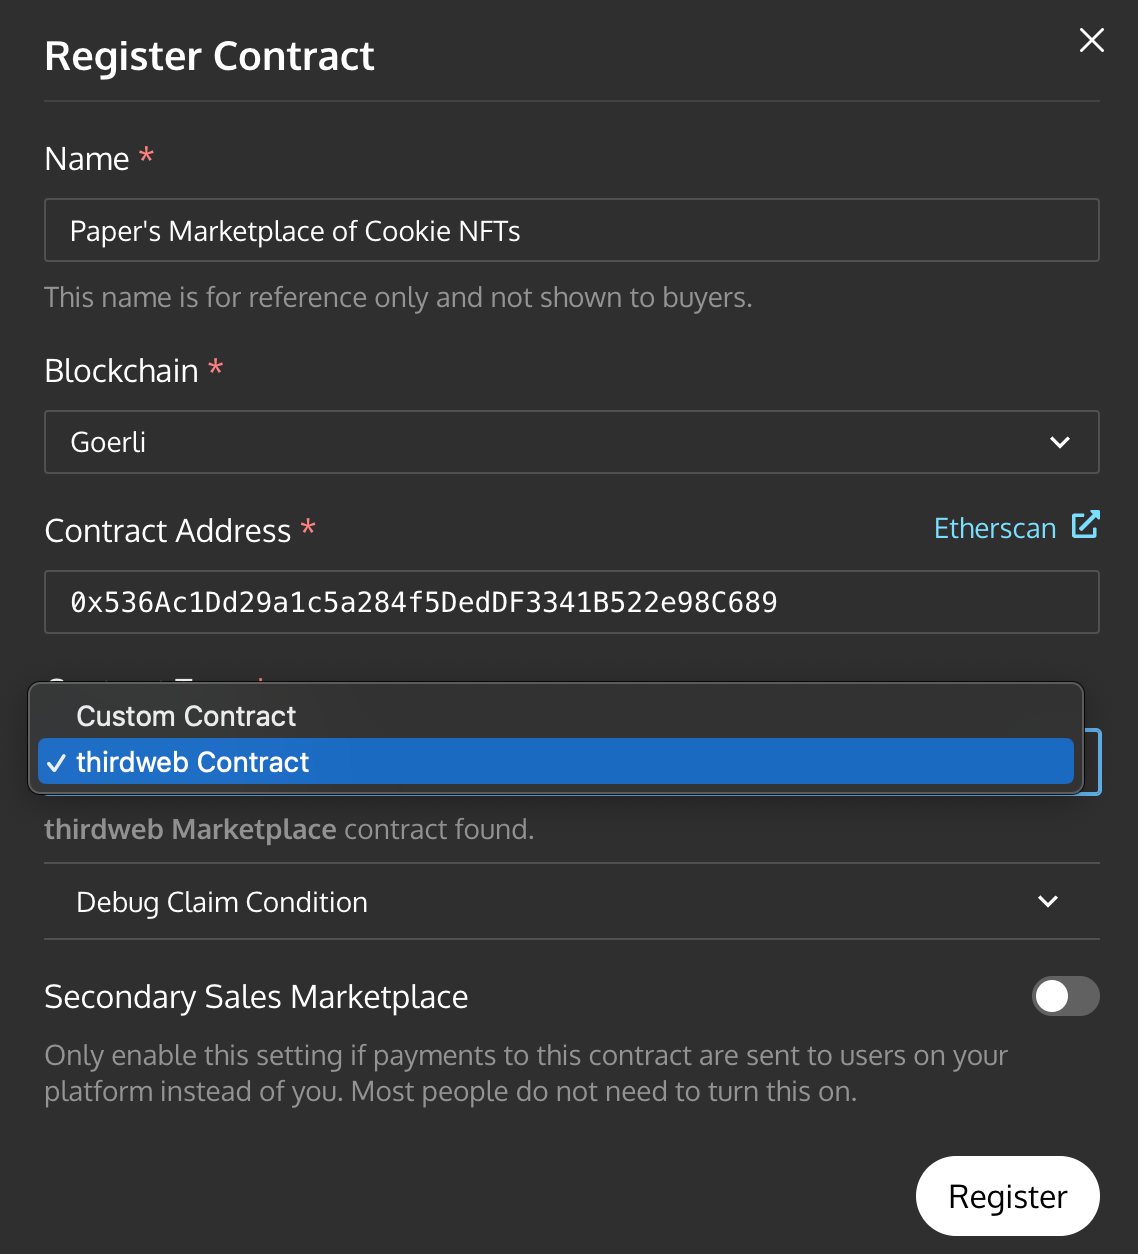 Paste in the smart contract address. Paper will automatically detect the thirdweb marketplace smart contract.